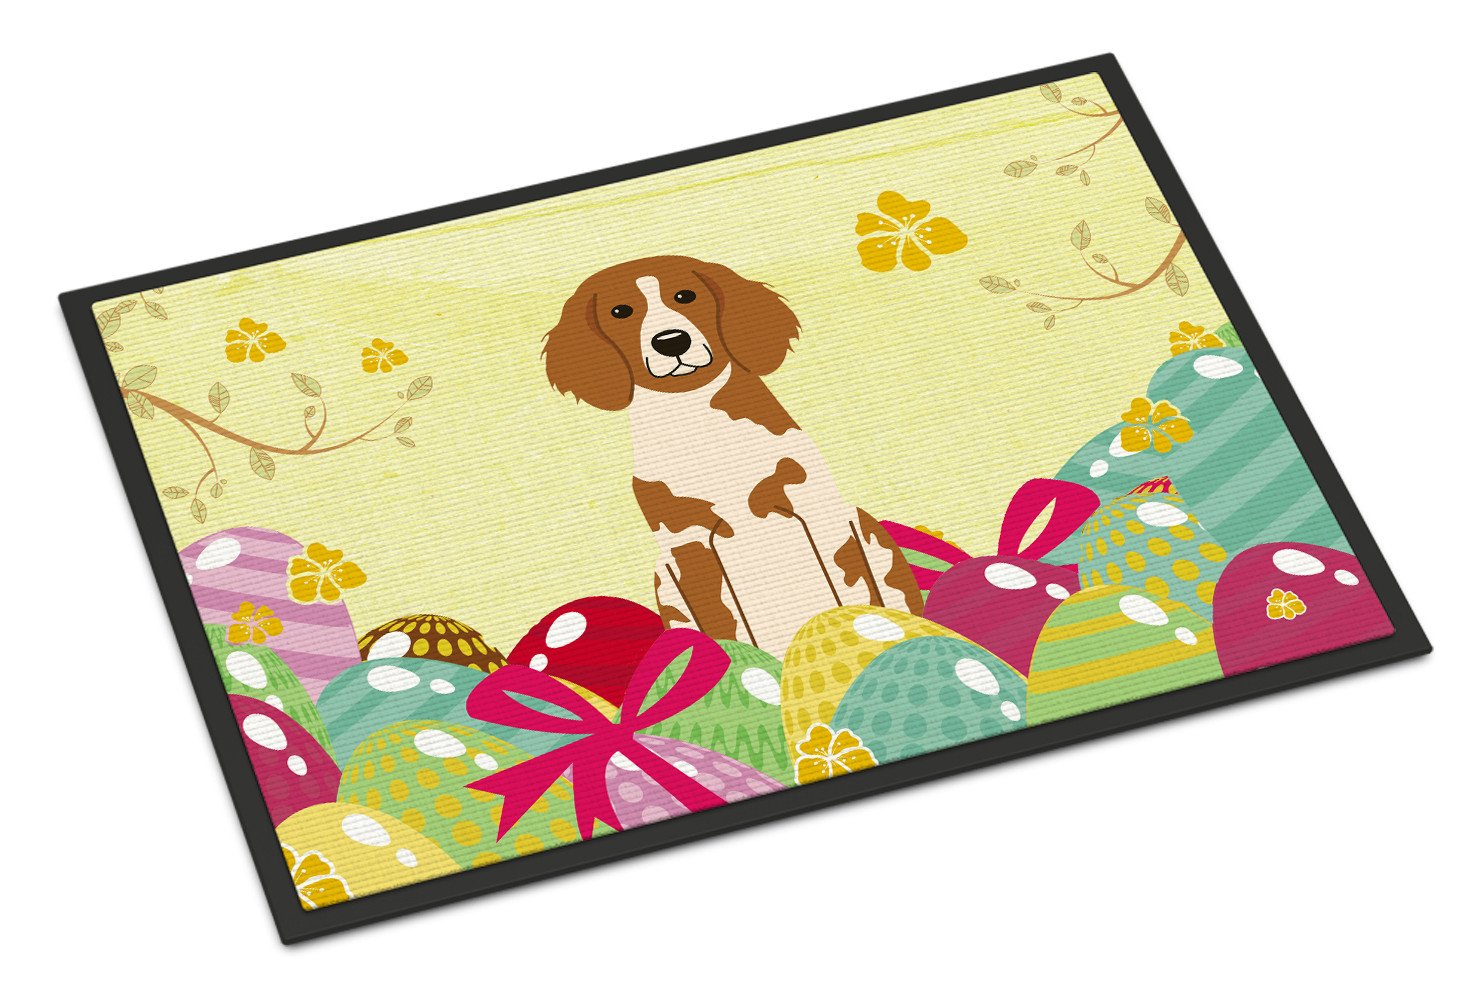 Easter Eggs Brittany Spaniel Indoor or Outdoor Mat 24x36 BB6072JMAT by Caroline's Treasures